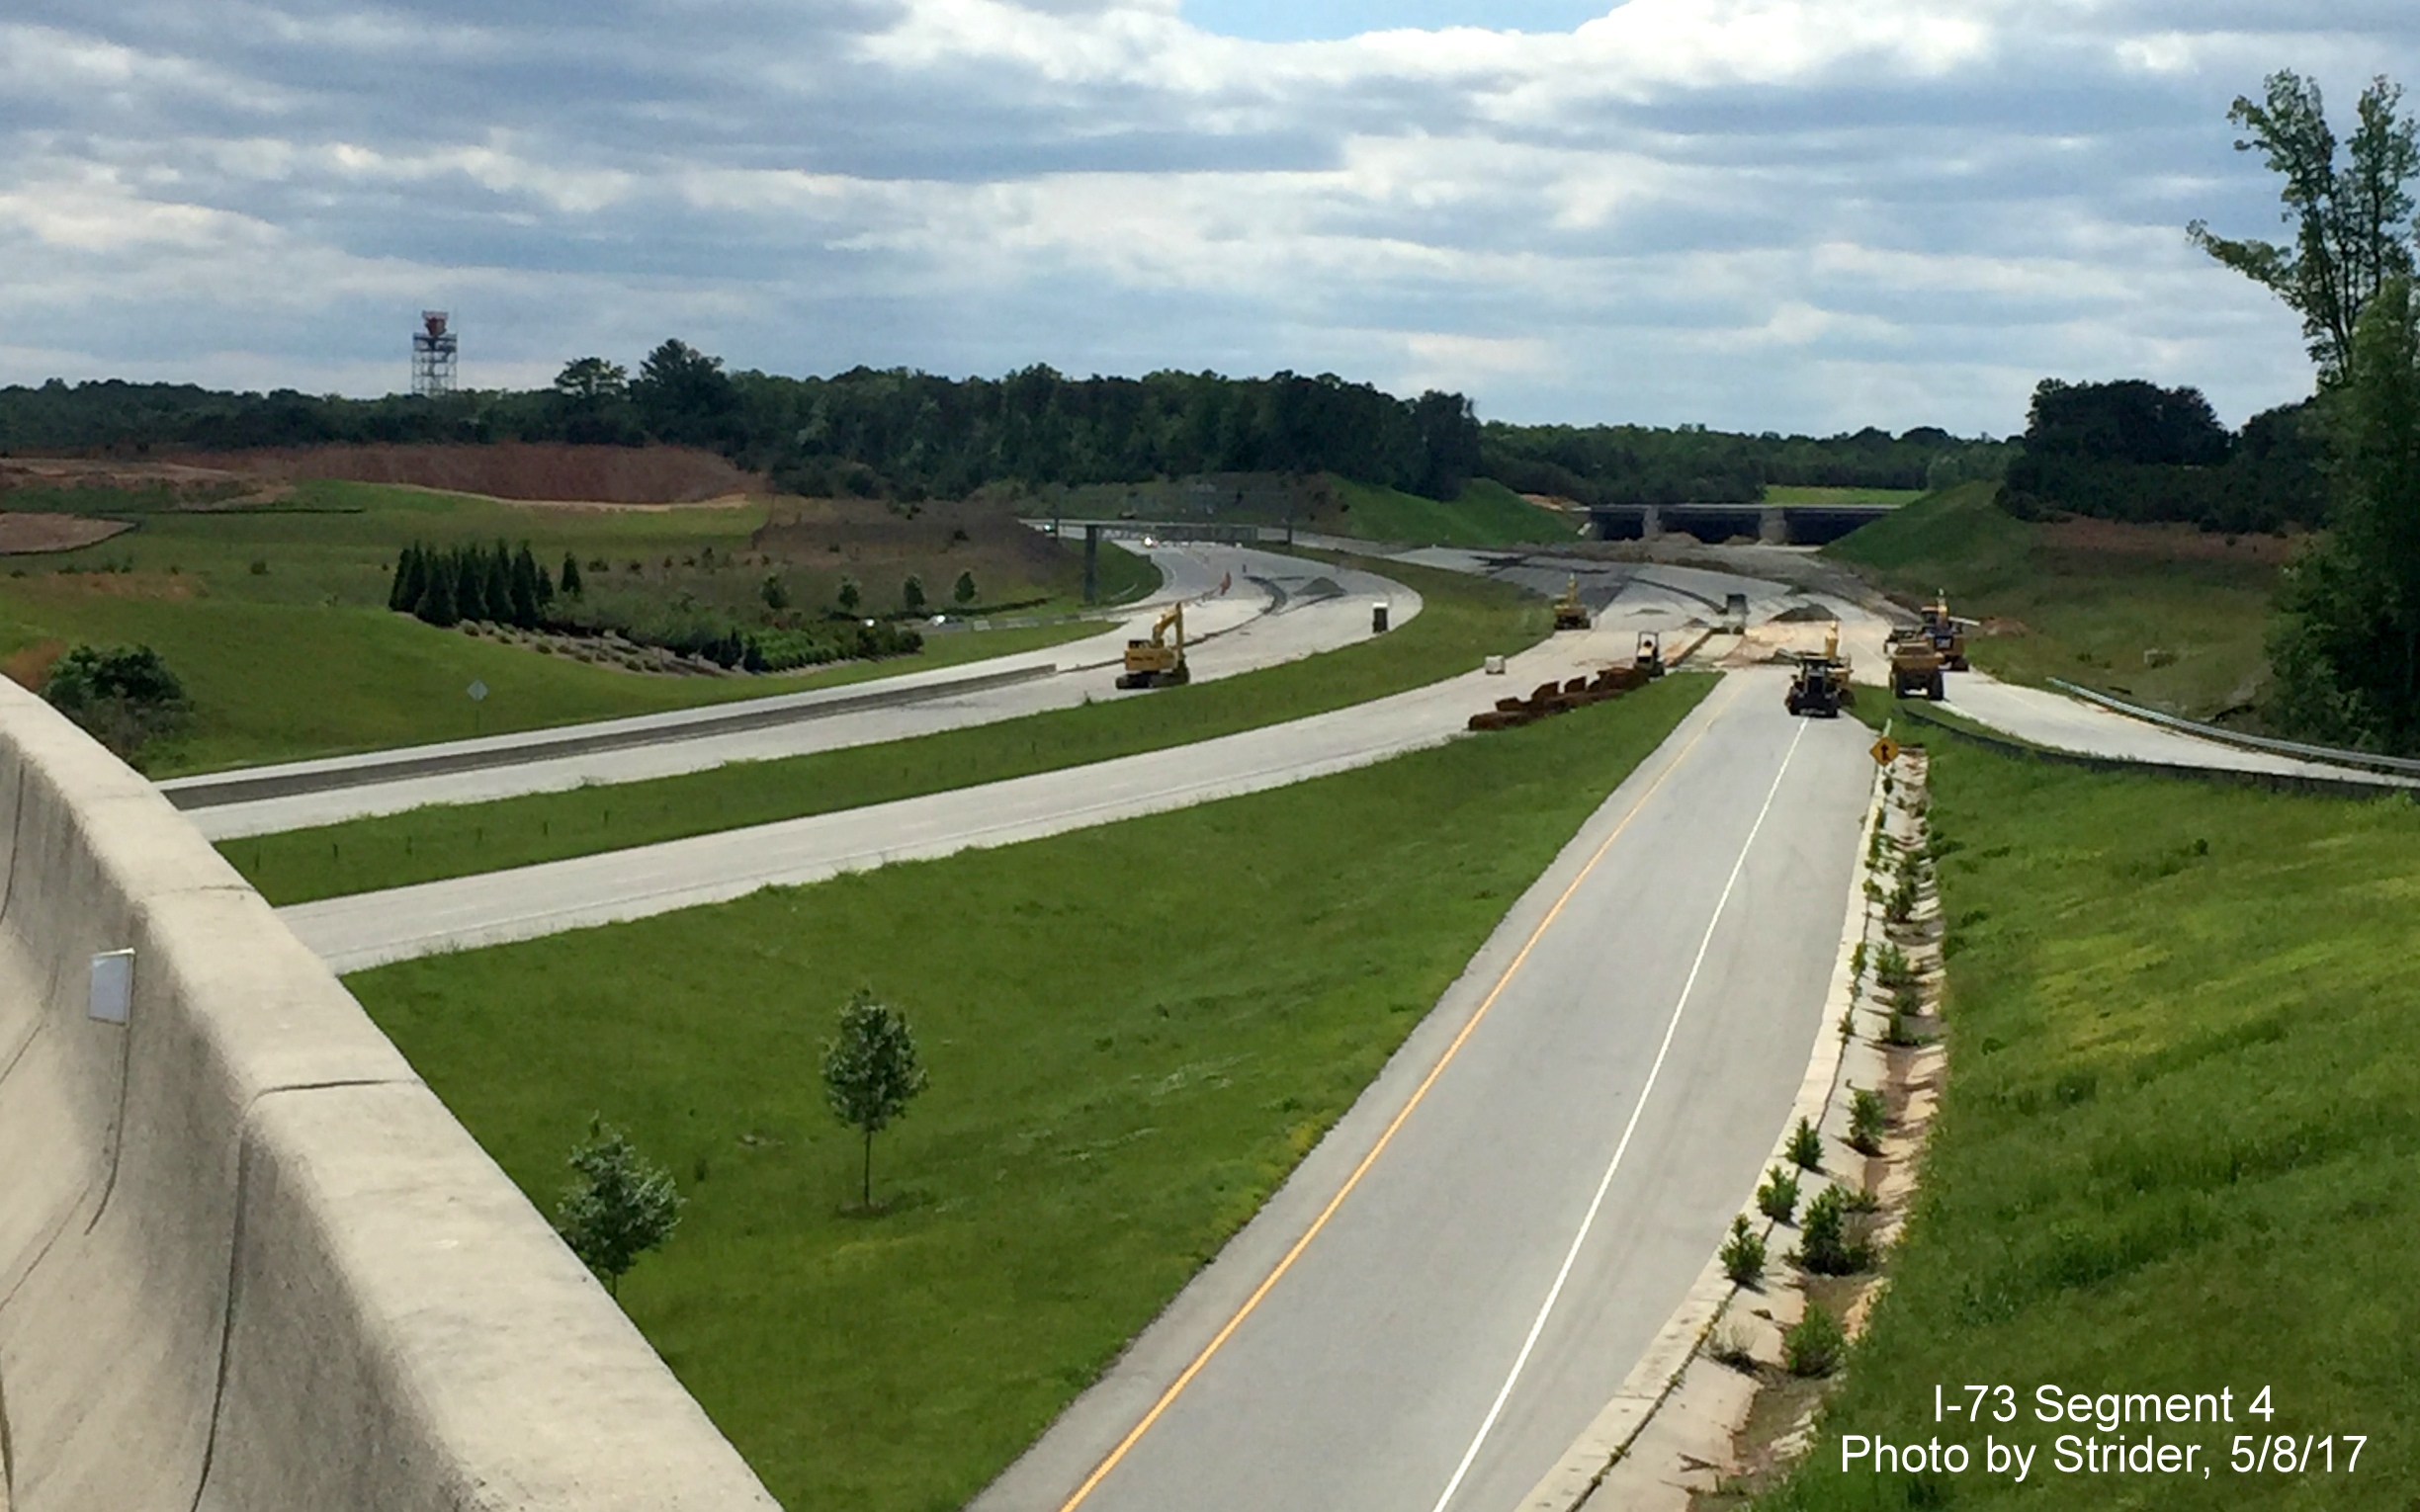 Image taken of construction along Bryan Blvd near PTI Airport to connect with future I-73 roadway, from Strider